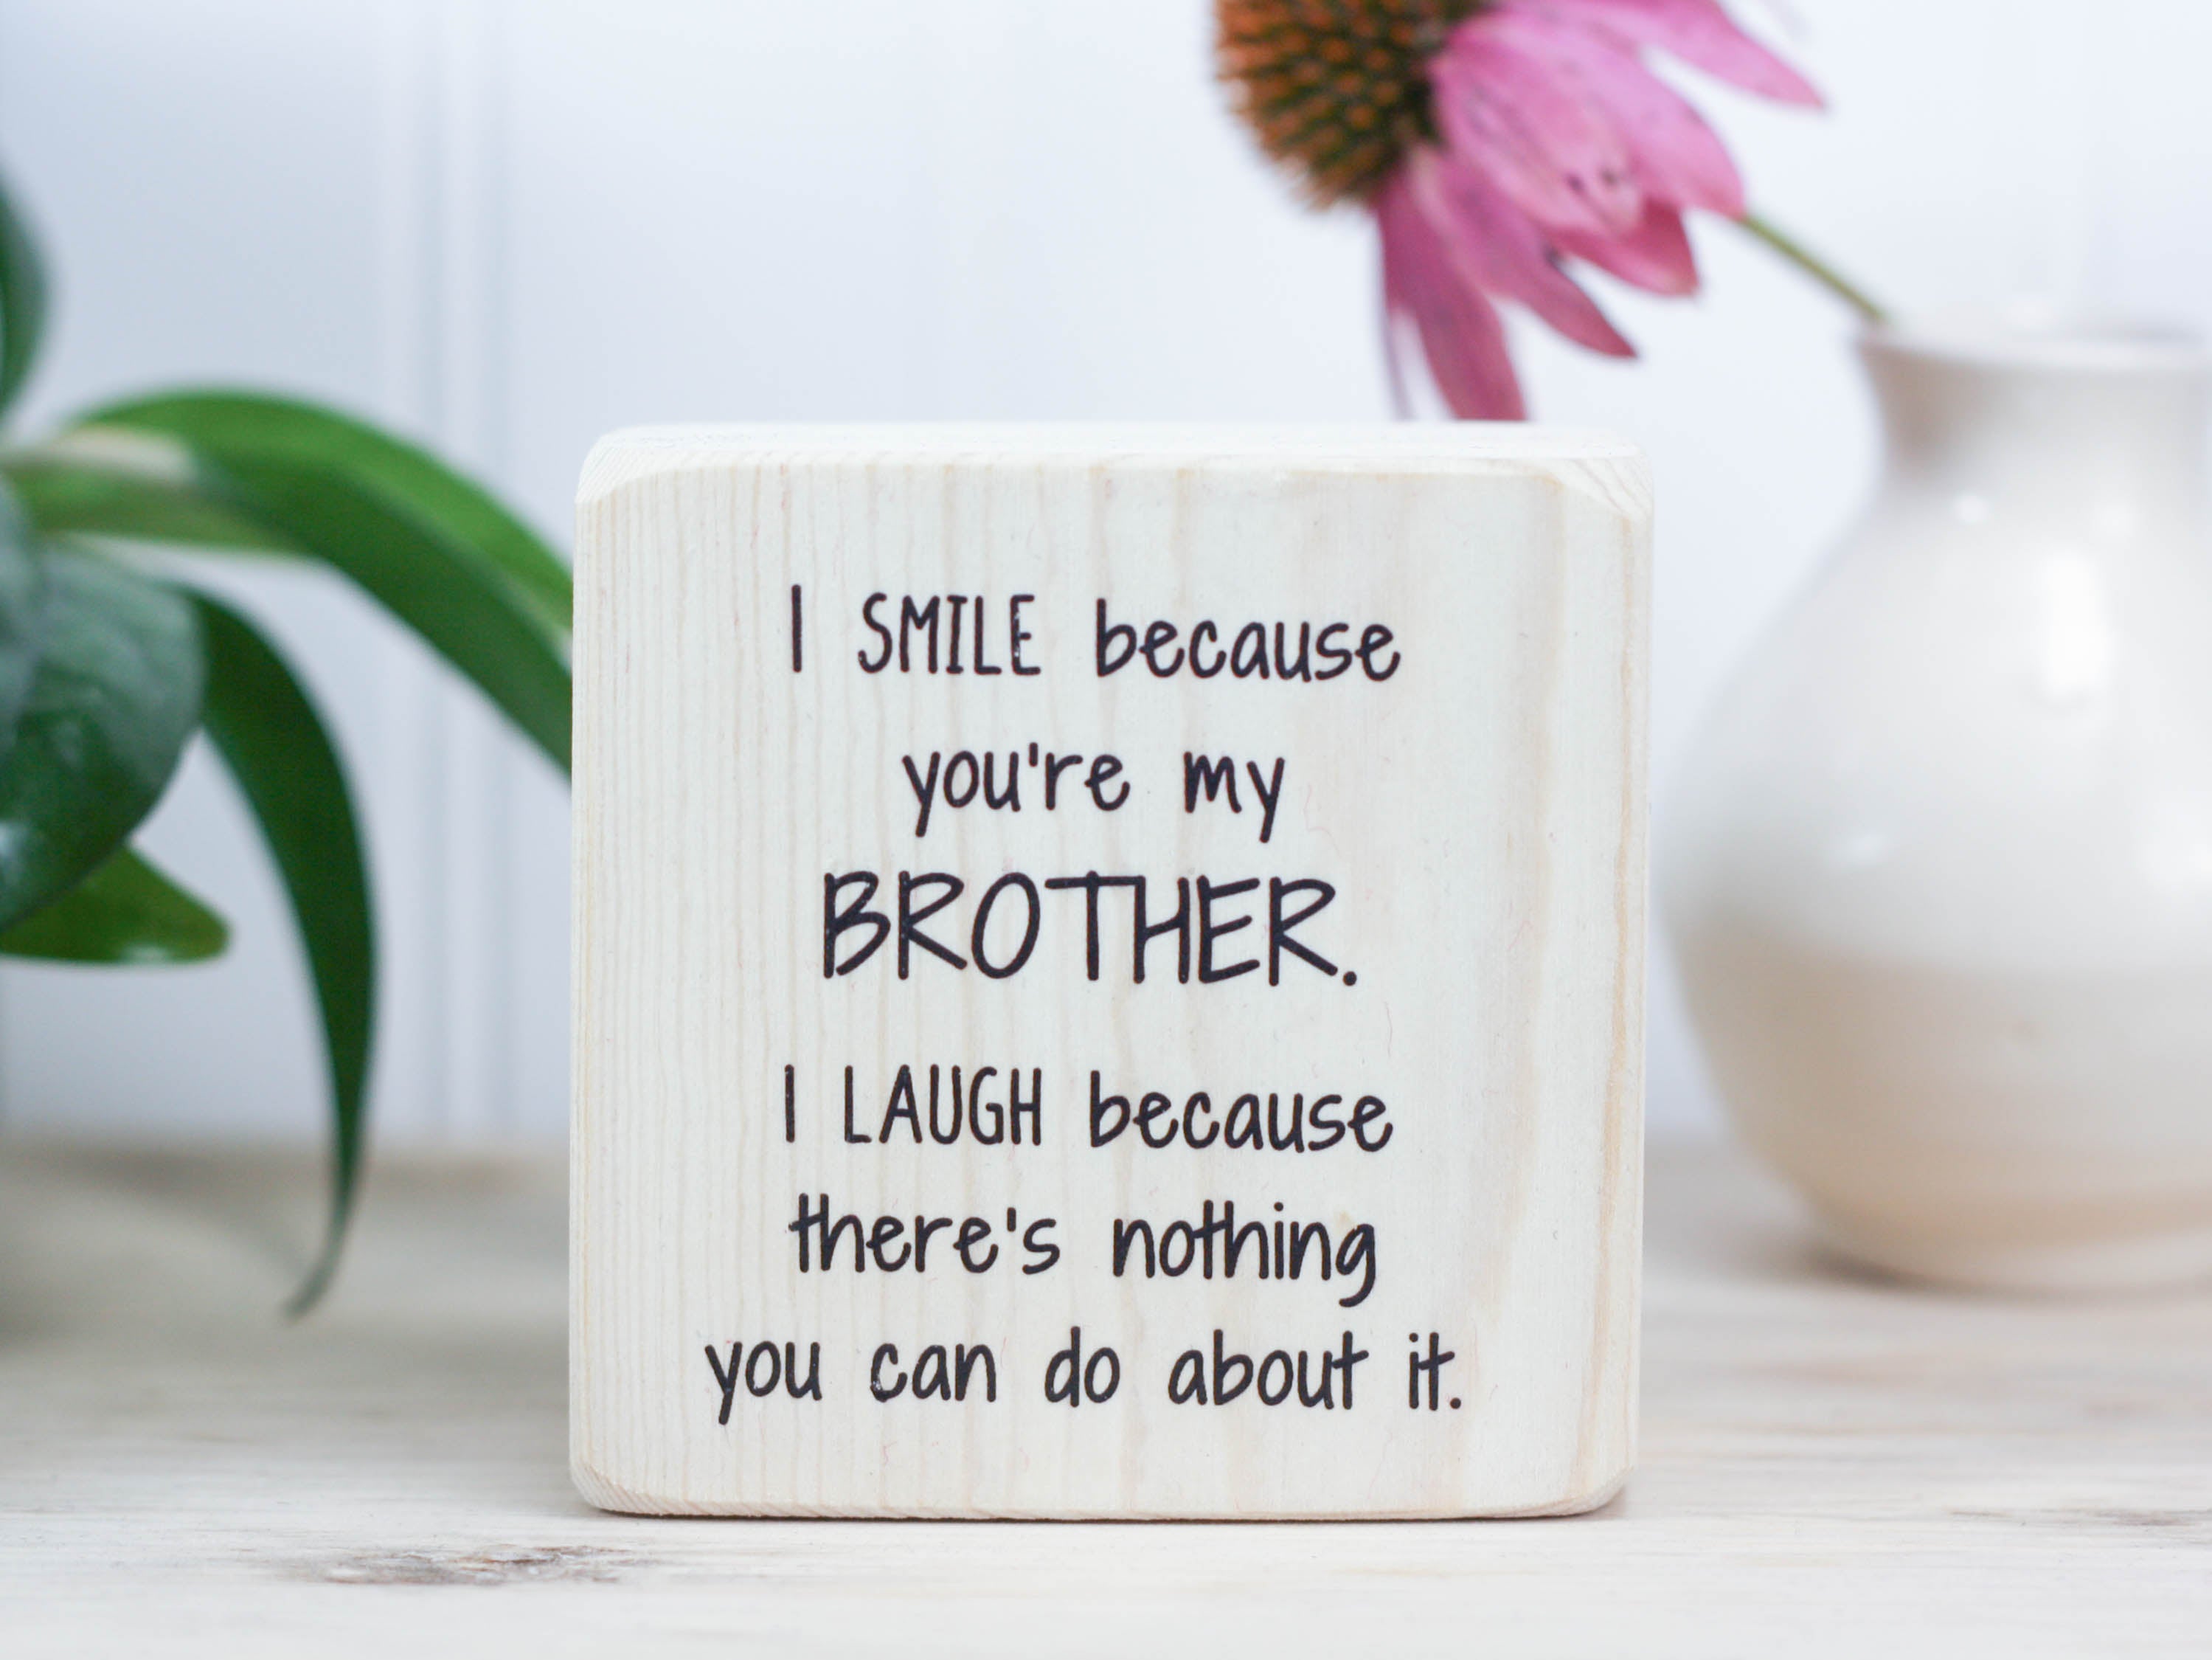 Small, freestanding, whitewash, solid wood sign with a funny saying on it "I smile because you're my brother. I laugh because there's nothing you can do about it."